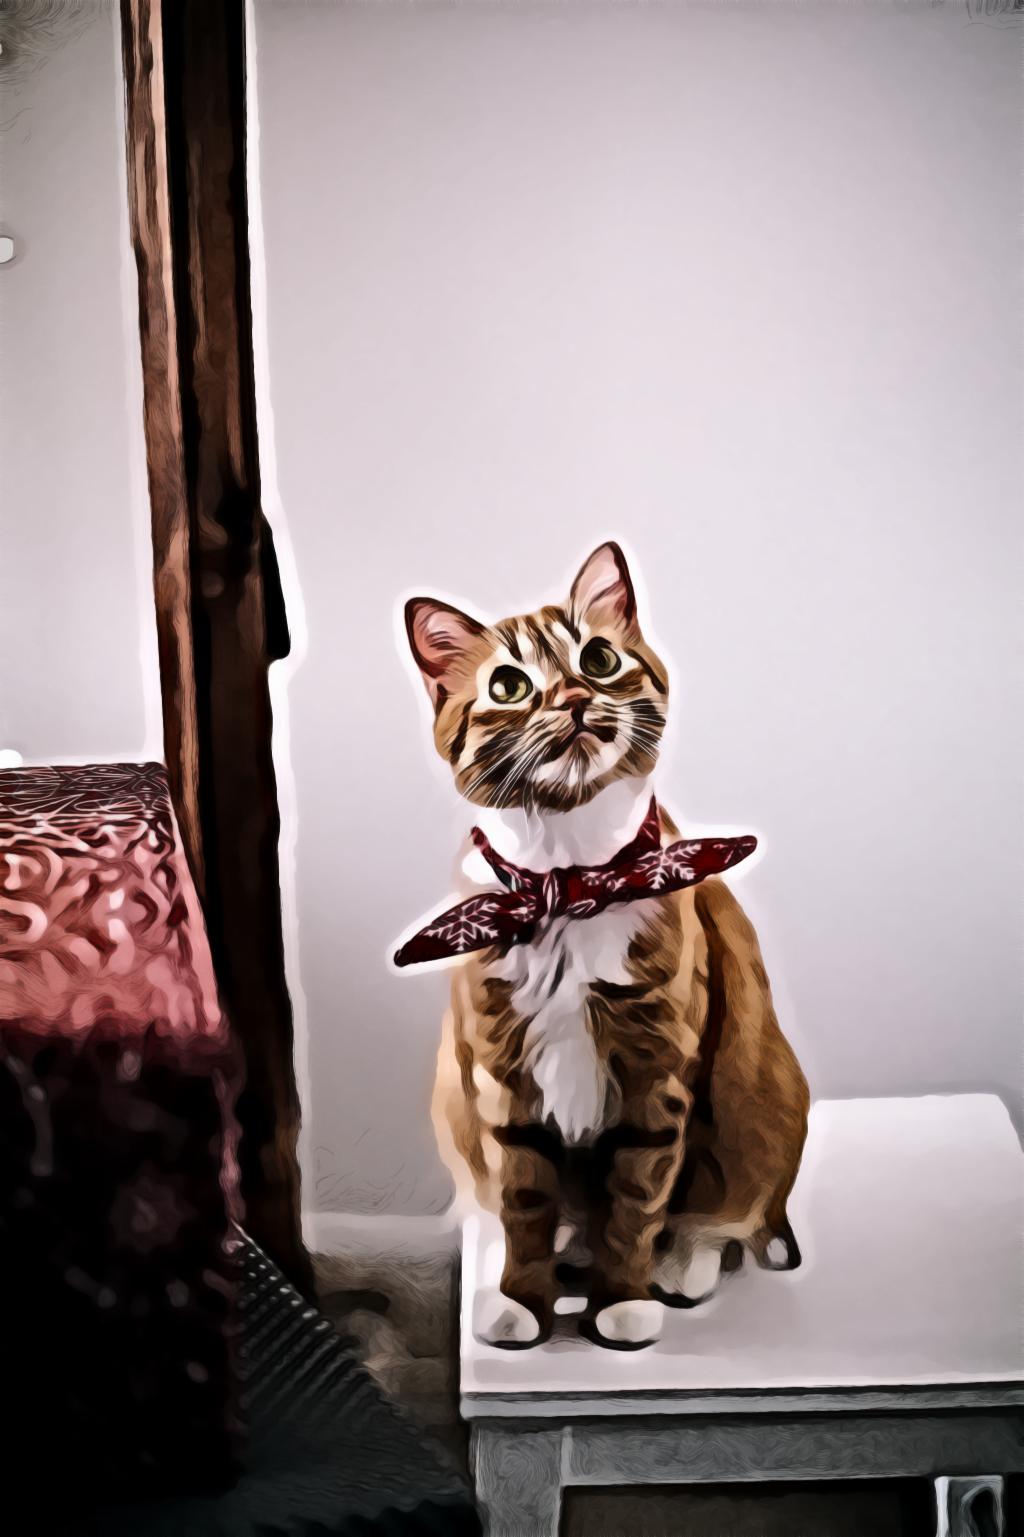 Orange Tabby Cat With Red Handkerchief Sitting On White Table